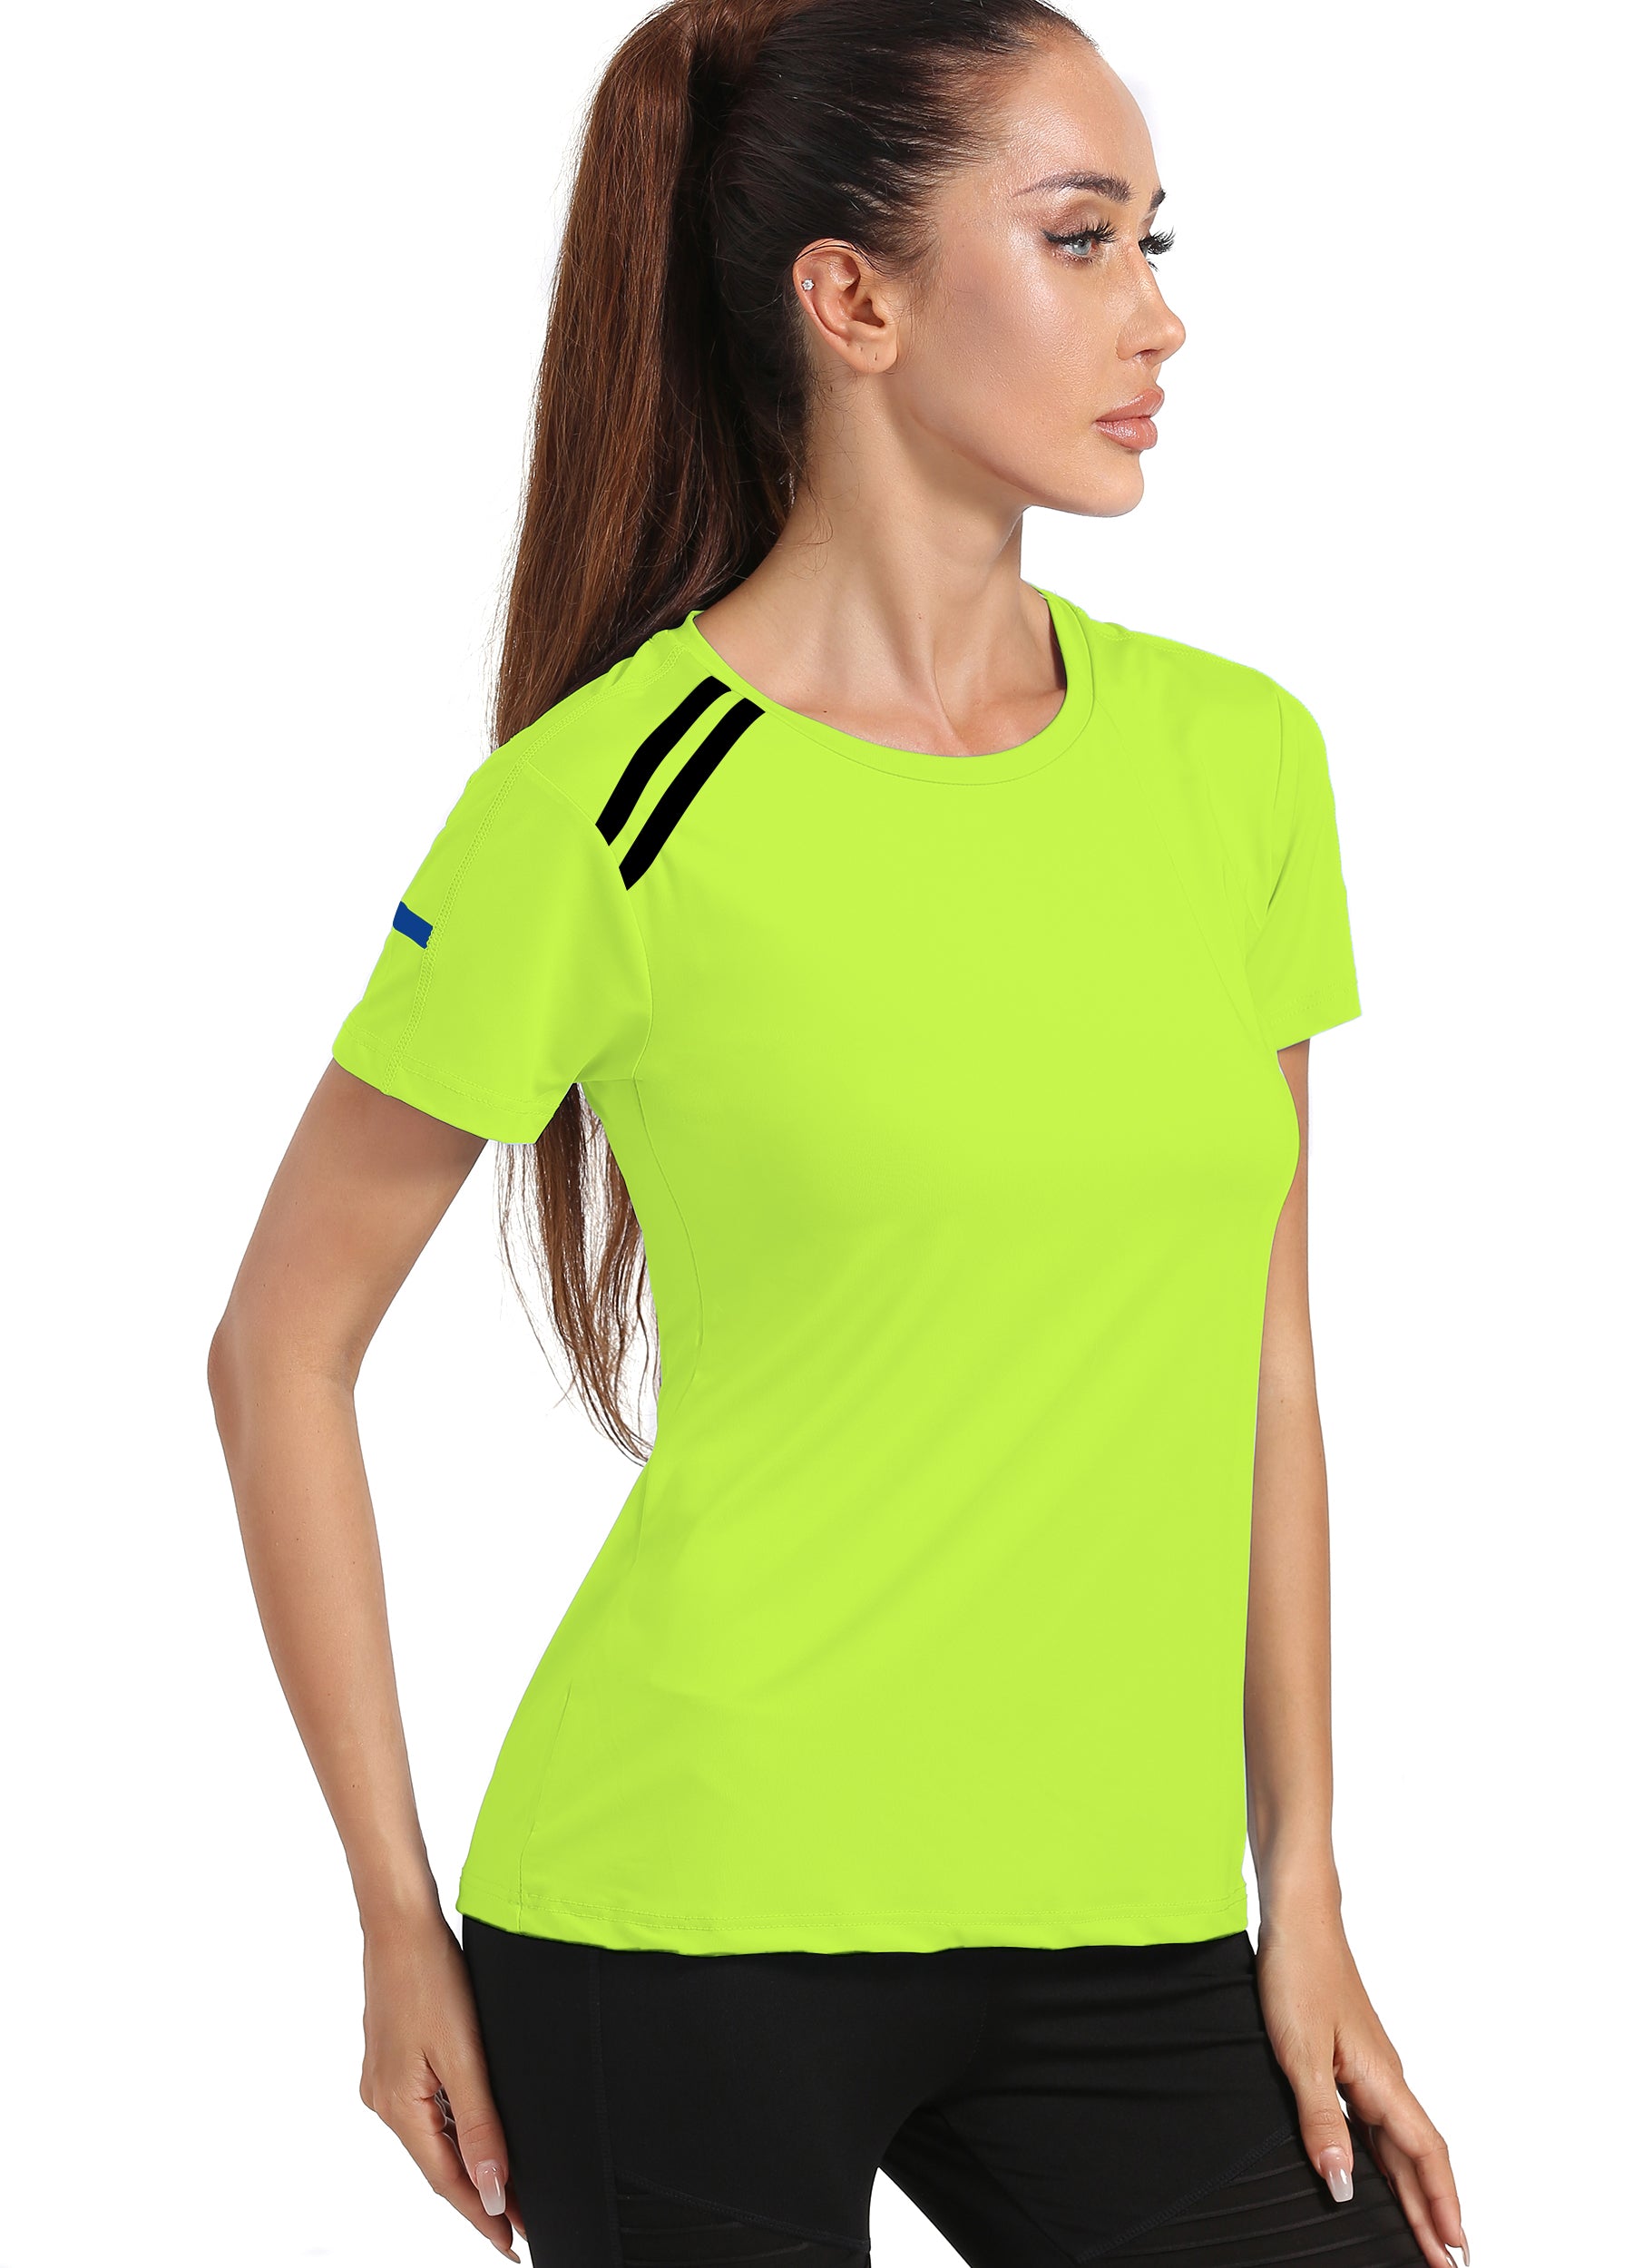 4POSE Women's Latest Summer QUICK Dry Tound Neck Stretch Green Training Tee